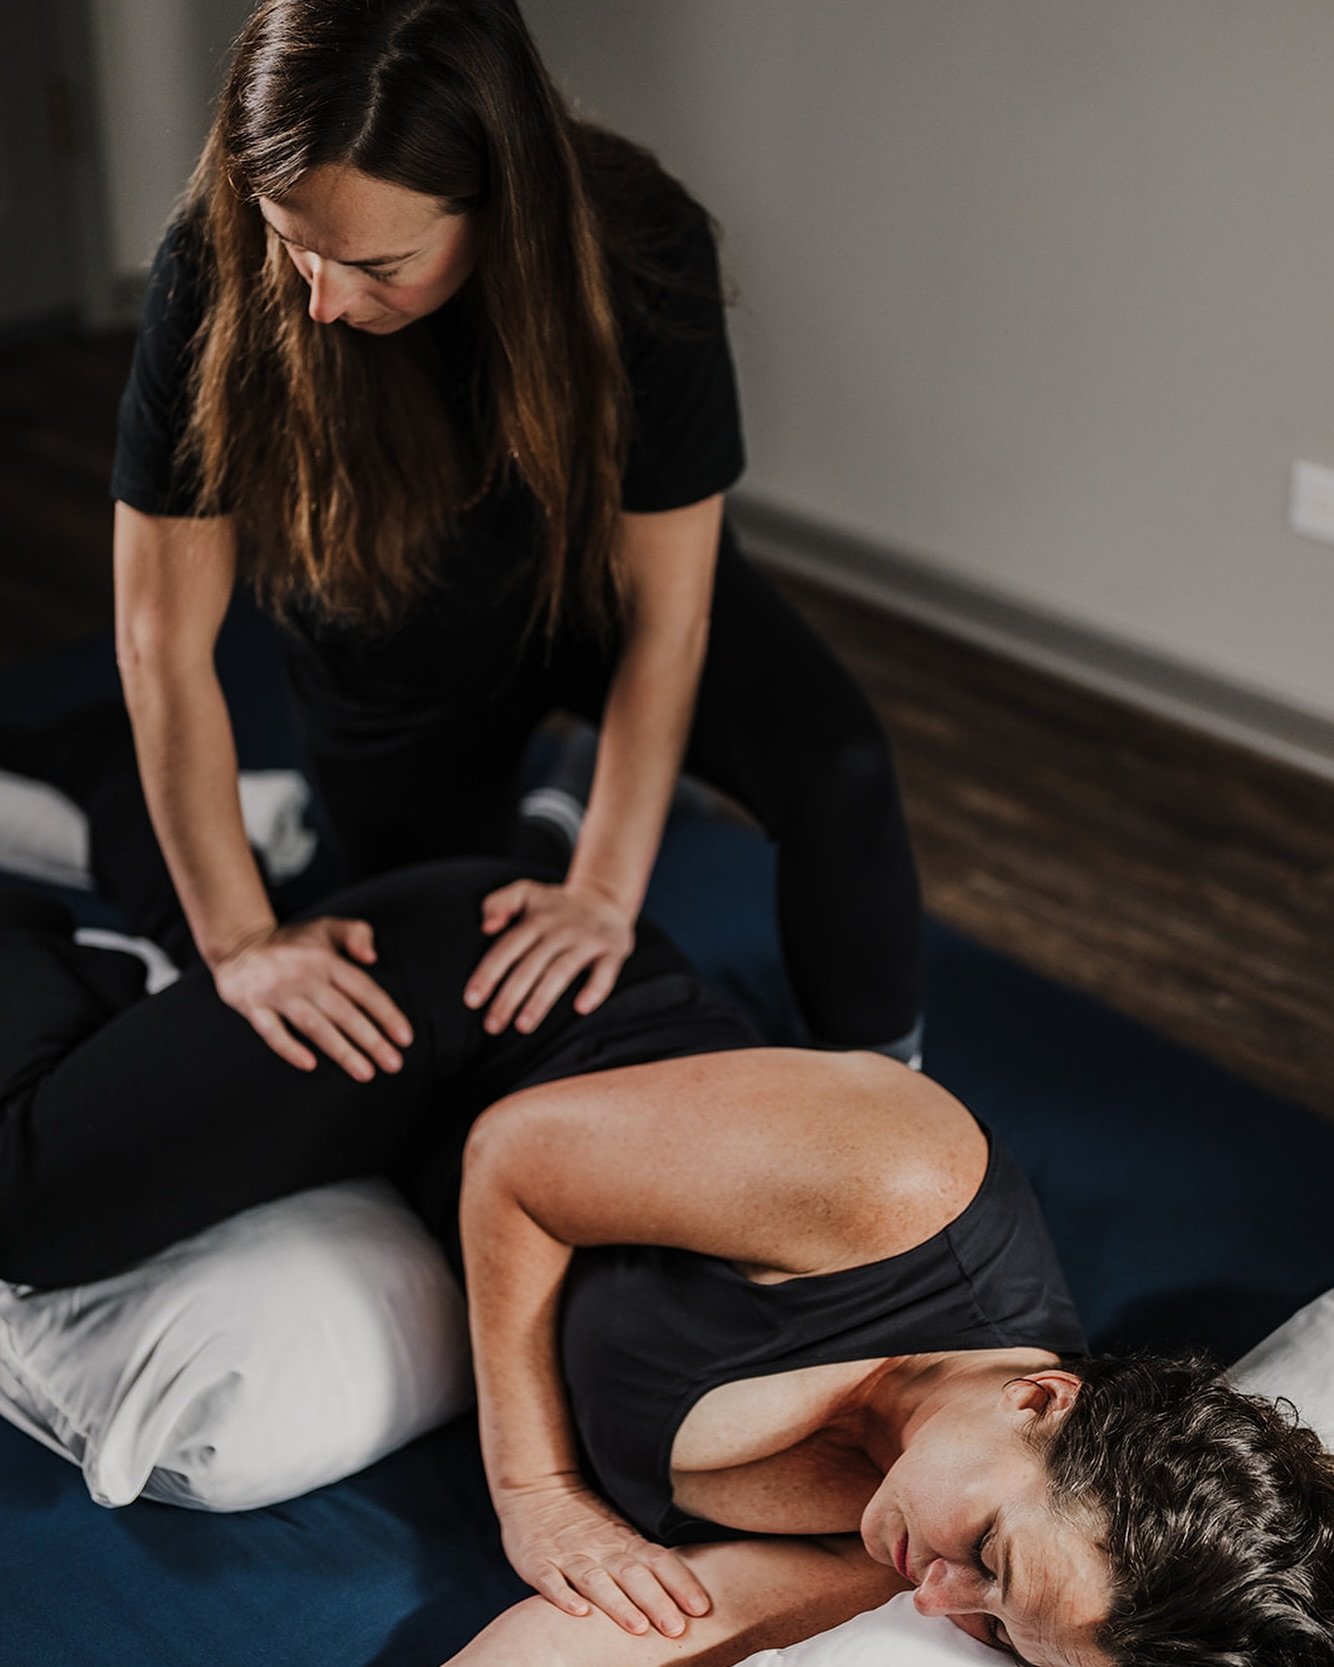 BENEFITS OF ZEN SHIATSU

Stress Reduction: Zen Shiatsu can help reduce stress and promote relaxation by releasing tension in the muscles and calming the nervous system. It encourages a deep sense of relaxation, which can be beneficial for overall wel